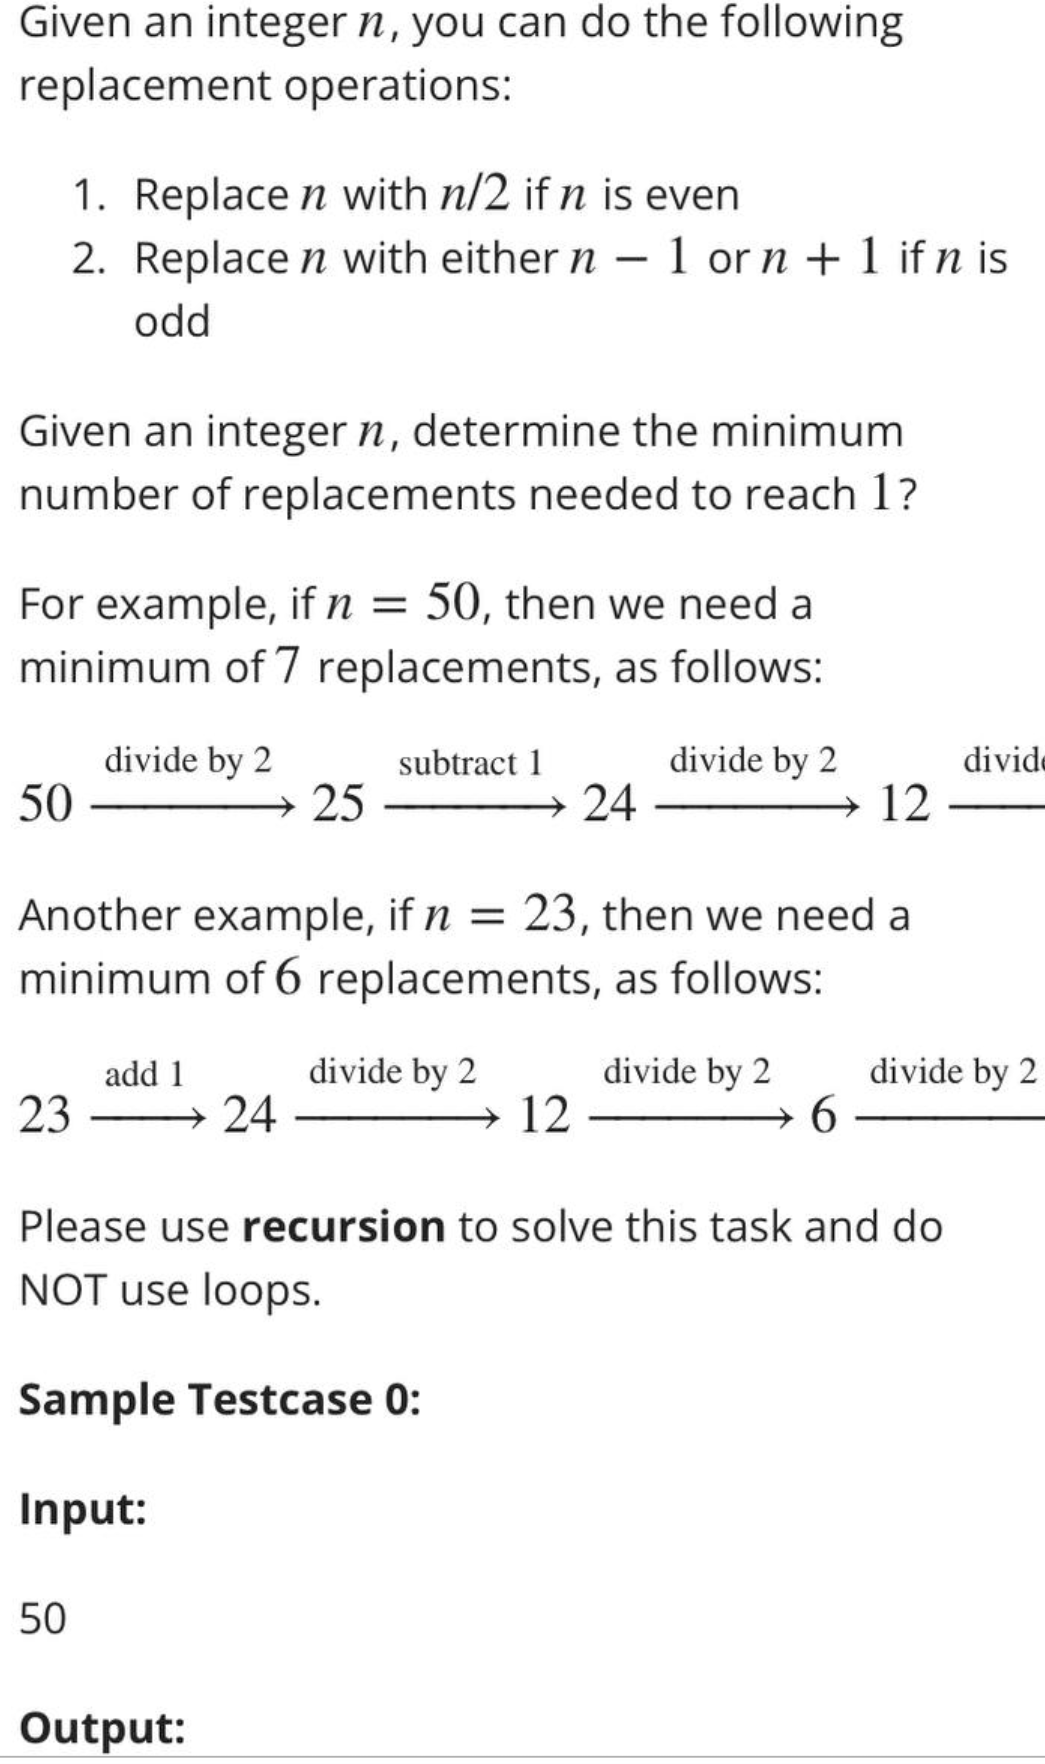 Given an integer n, you can do the following
replacement operations:
1. Replace n with n/2 if n is even
2. Replace n with either n - 1 or n + 1 if n is
odd
Given an integer n, determine the minimum
number of replacements needed to reach 1?
For example, if n = 50, then we need a
minimum of 7 replacements, as follows:
50
divide by 2
→25
50
add 1
23-
Another example, if n = 23, then we need a
minimum of 6 replacements, as follows:
divide by 2
subtract 1
24
Output:
24
12
divide by 2
divide by 2
12
6
Please use recursion to solve this task and do
NOT use loops.
Sample Testcase 0:
Input:
divide
divide by 2